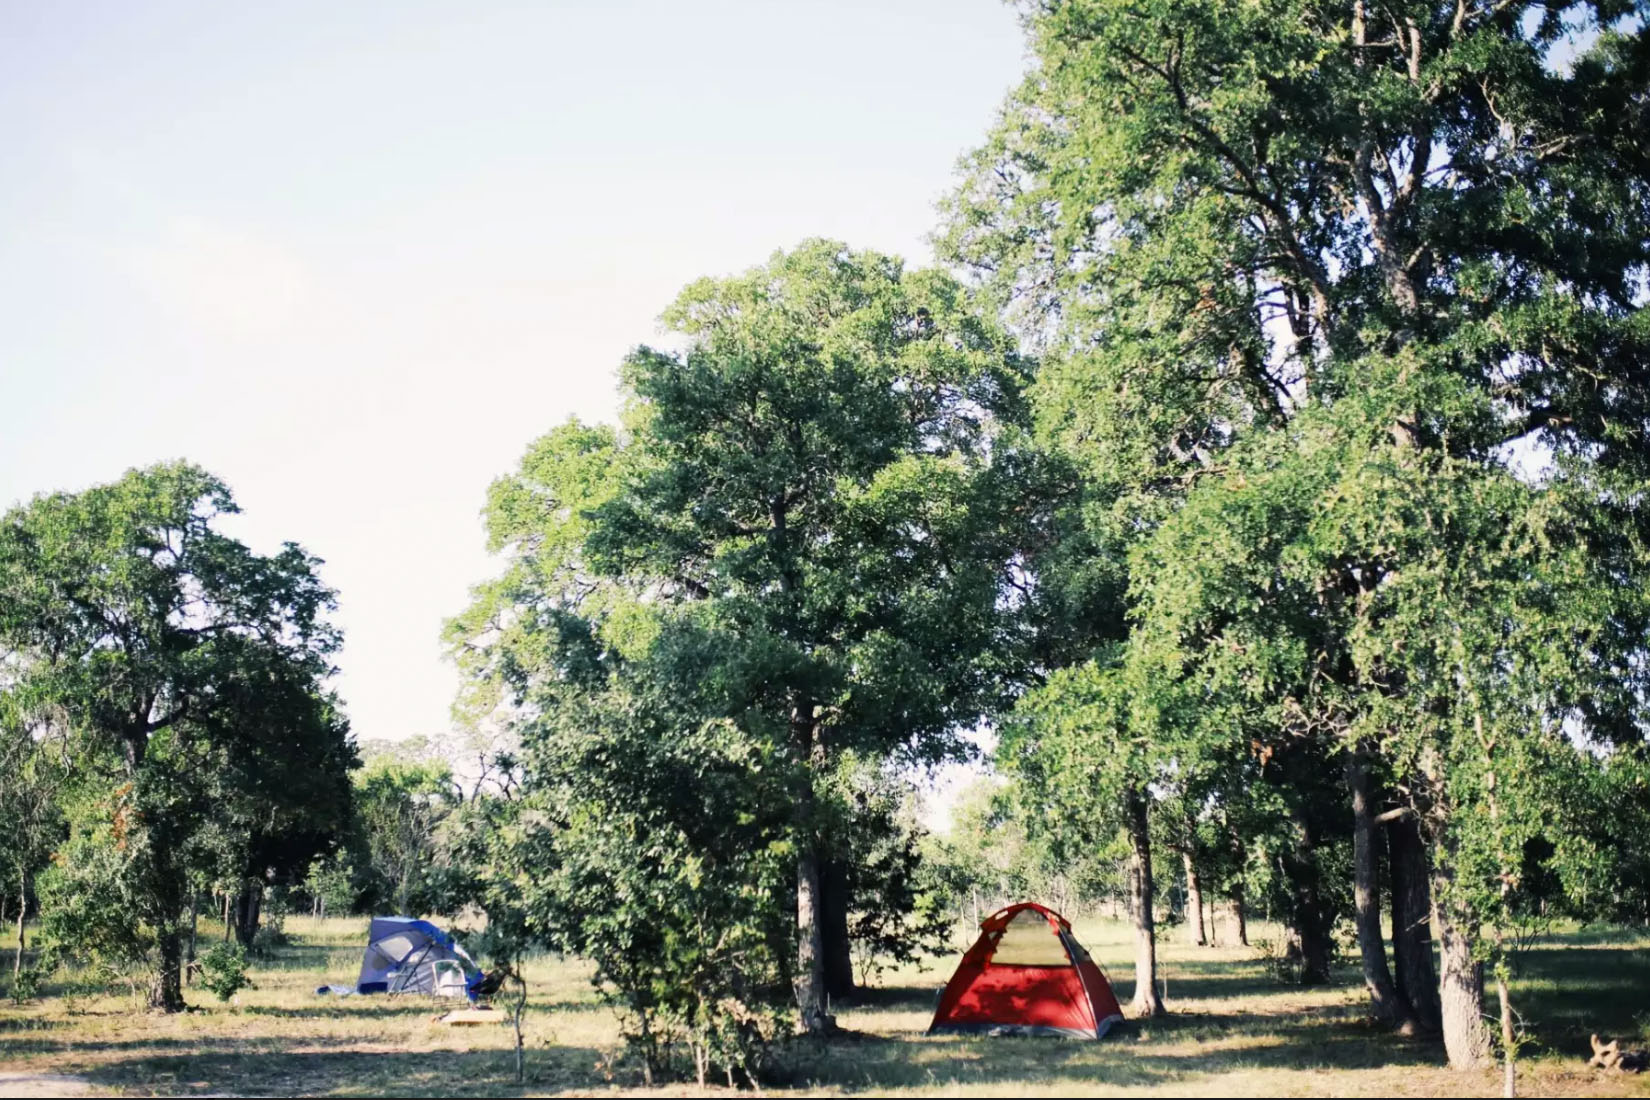 Al 's gemmested tilbyder billig camping i London for $25's Hideaway offers low-cost camping in Texas for $25